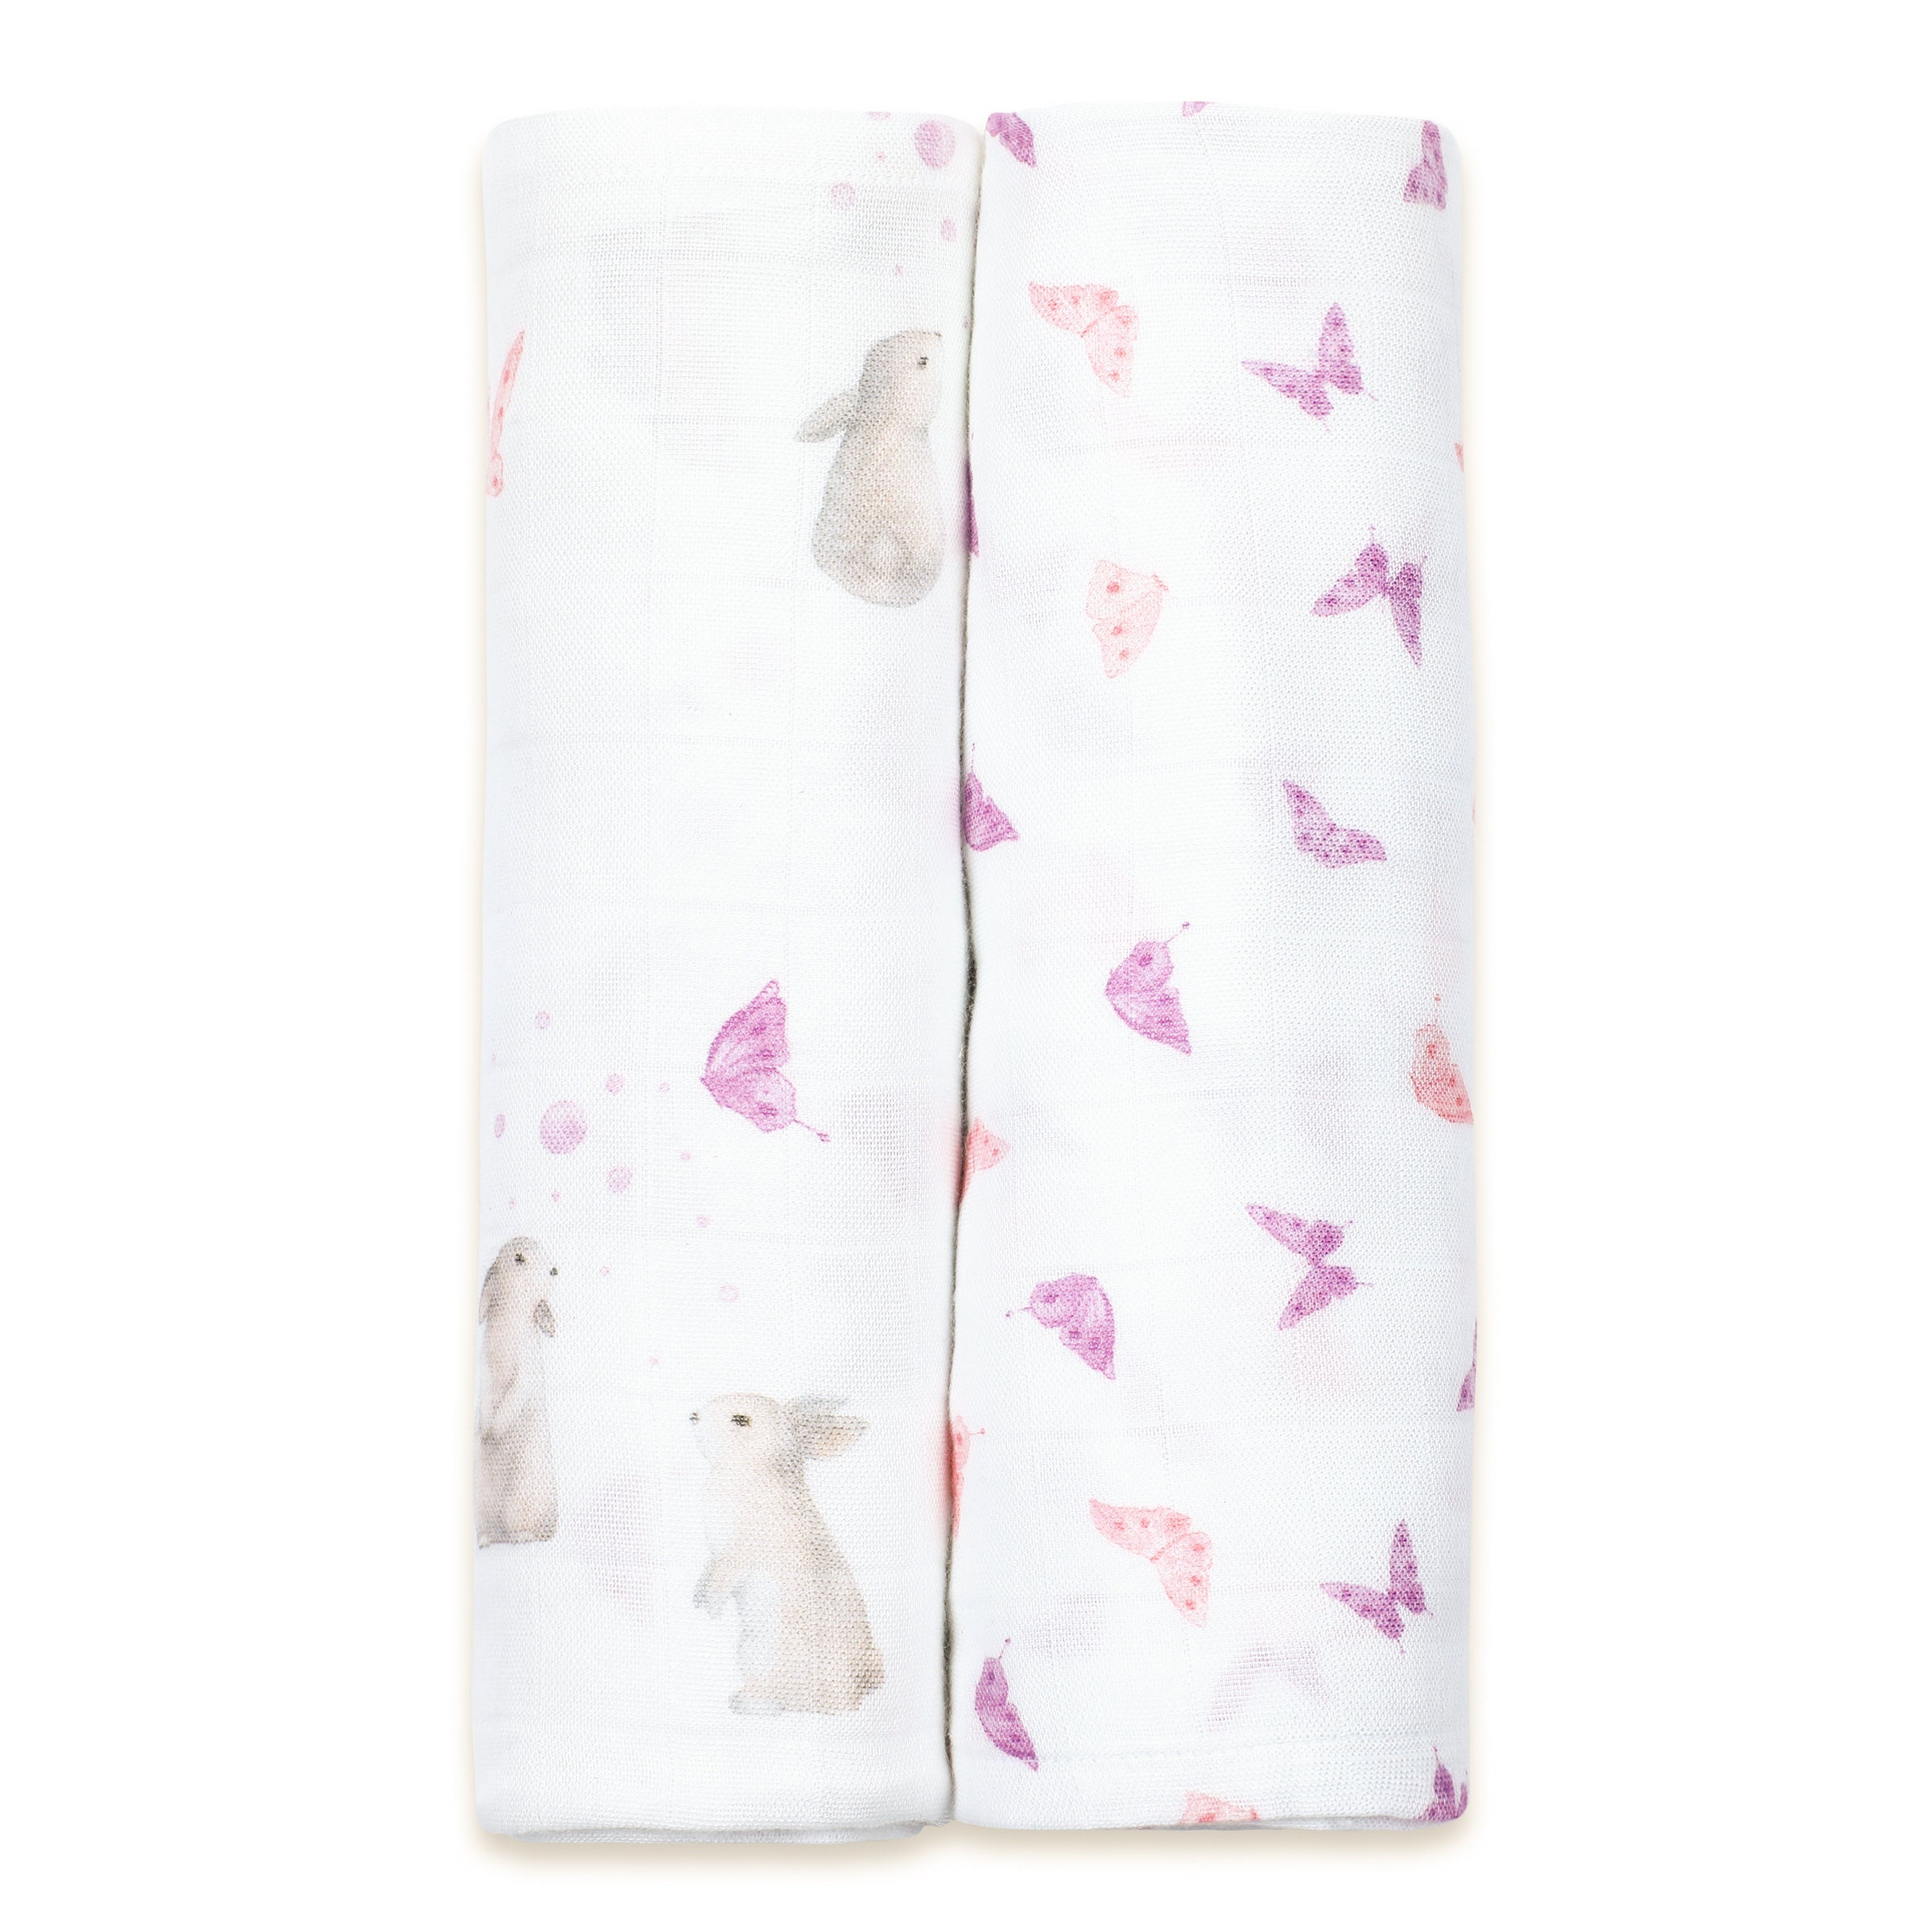 Bamboo Muslin Swaddles Best Buds set of 2 - Etsy